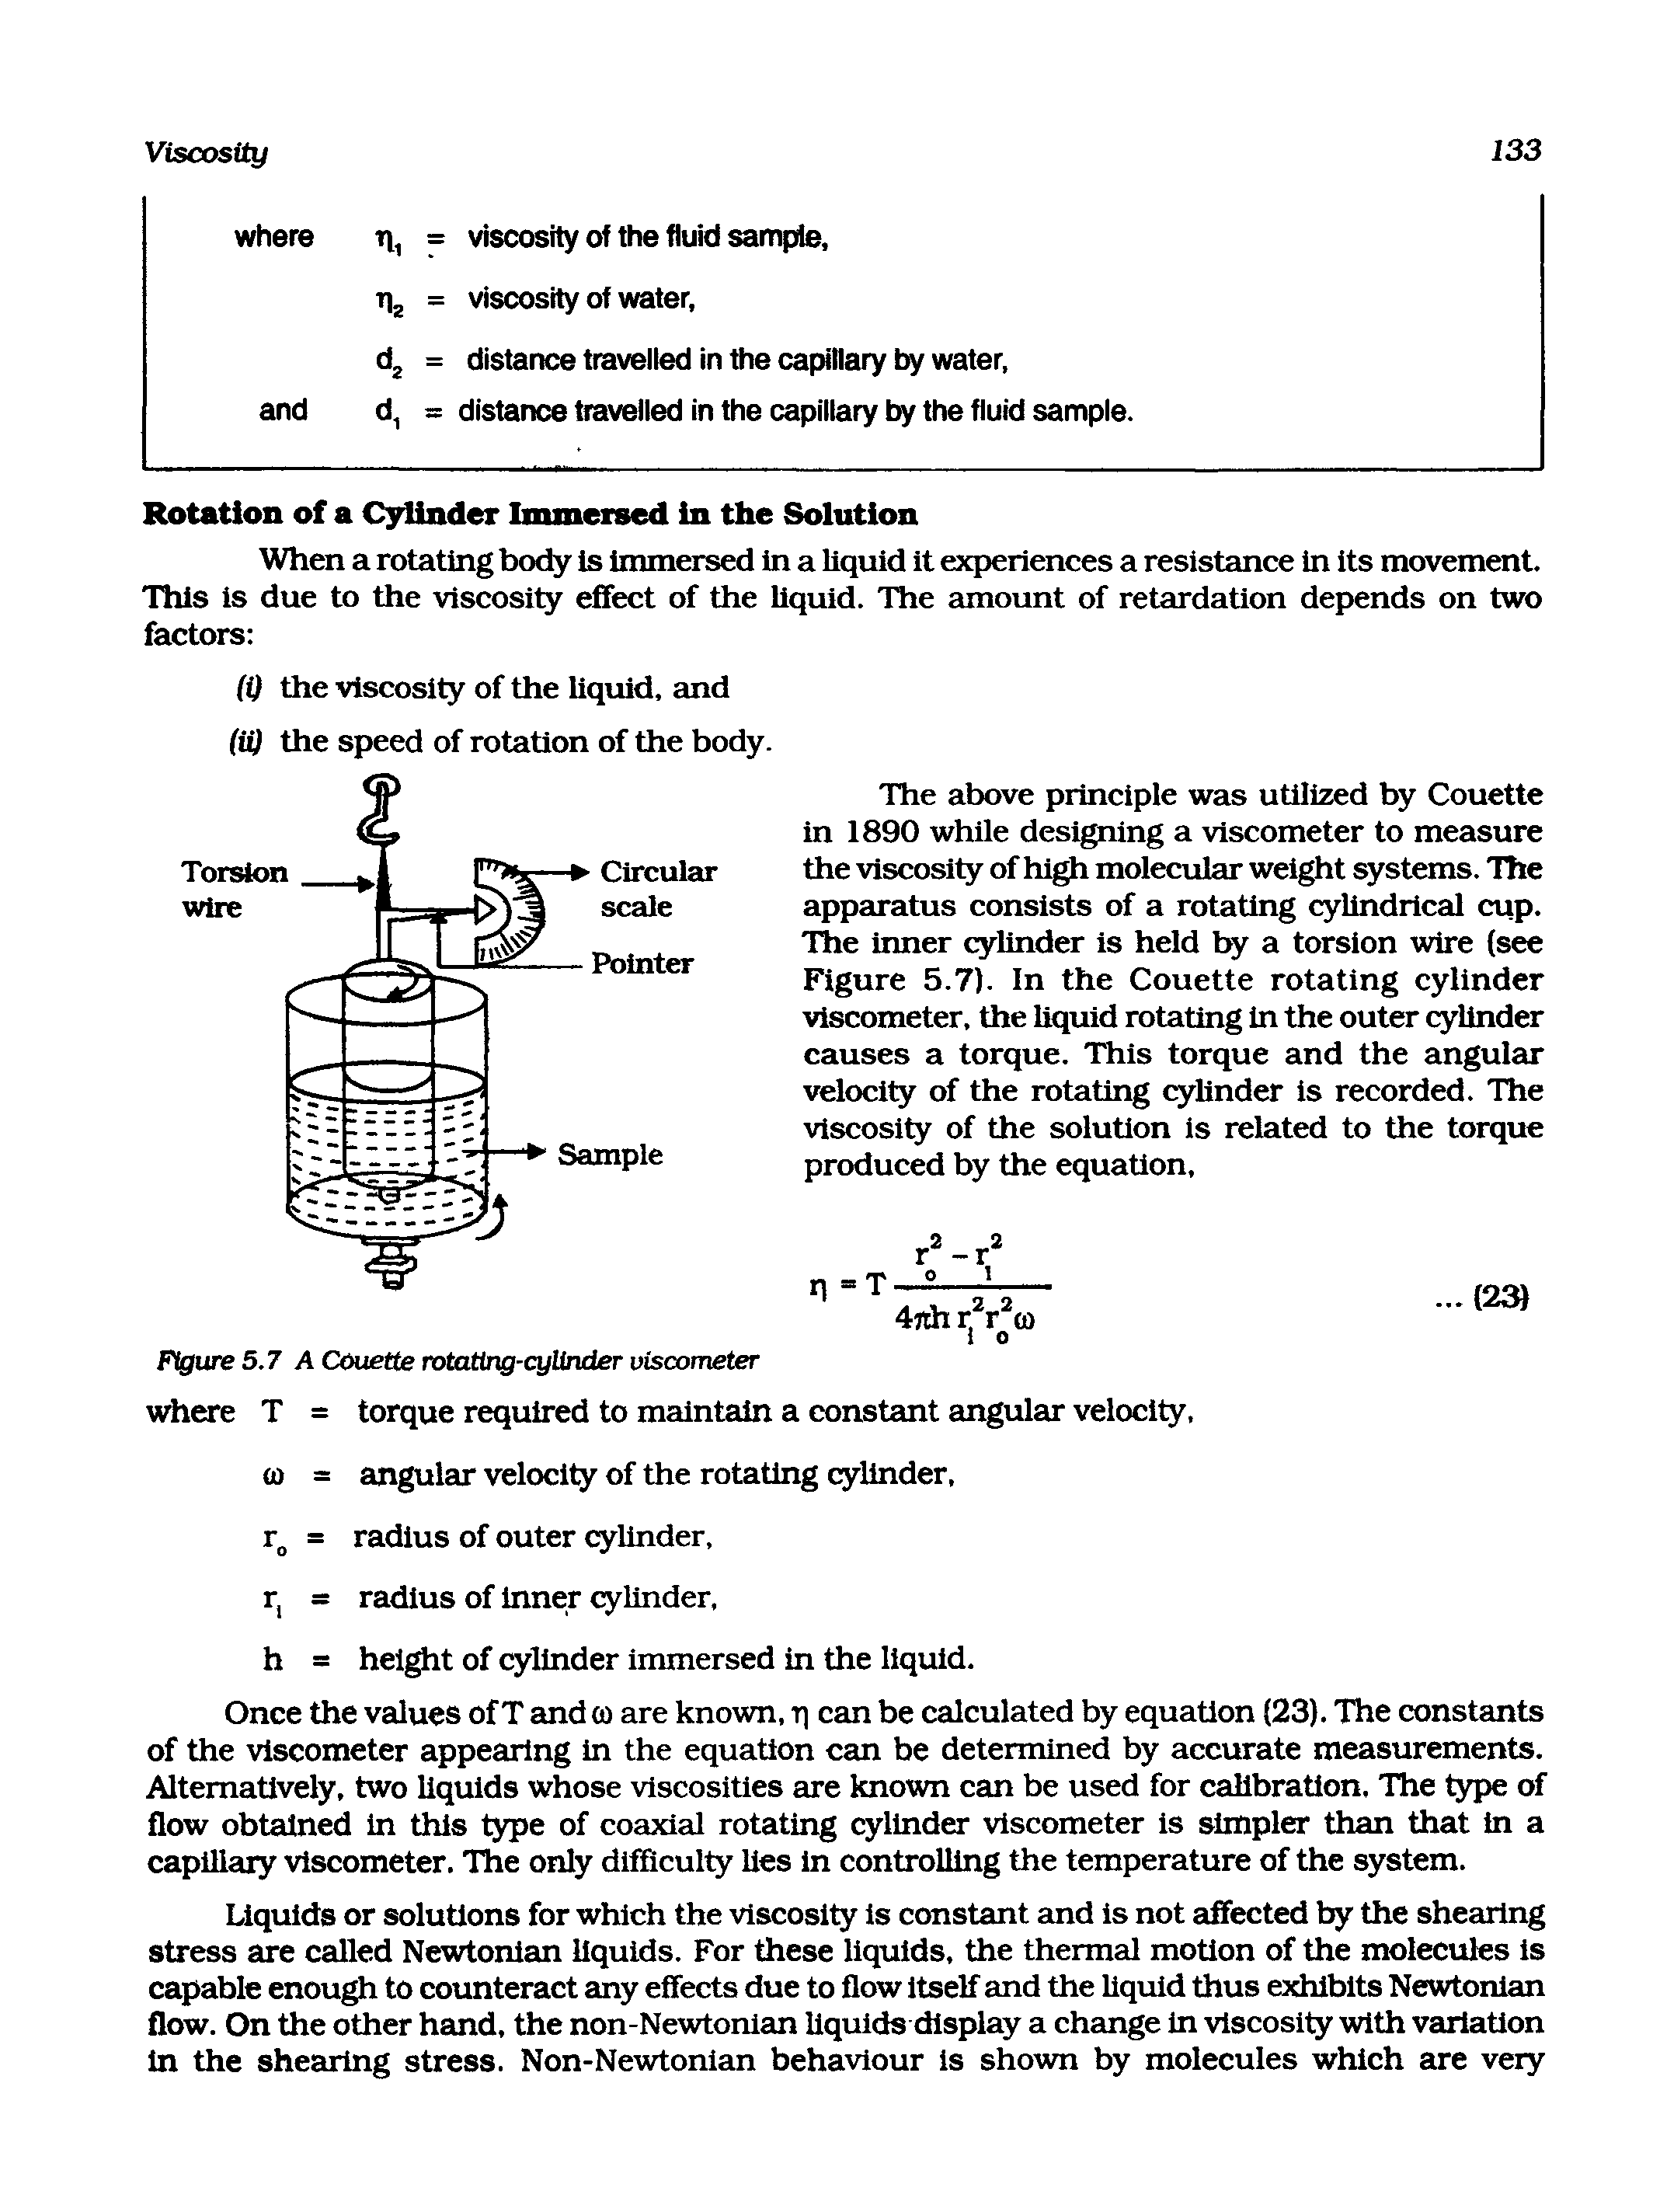 Figure 5.7 A Couette rotatlng-cylinder viscometer where T = torque required to maintain a constant angular velocity,...